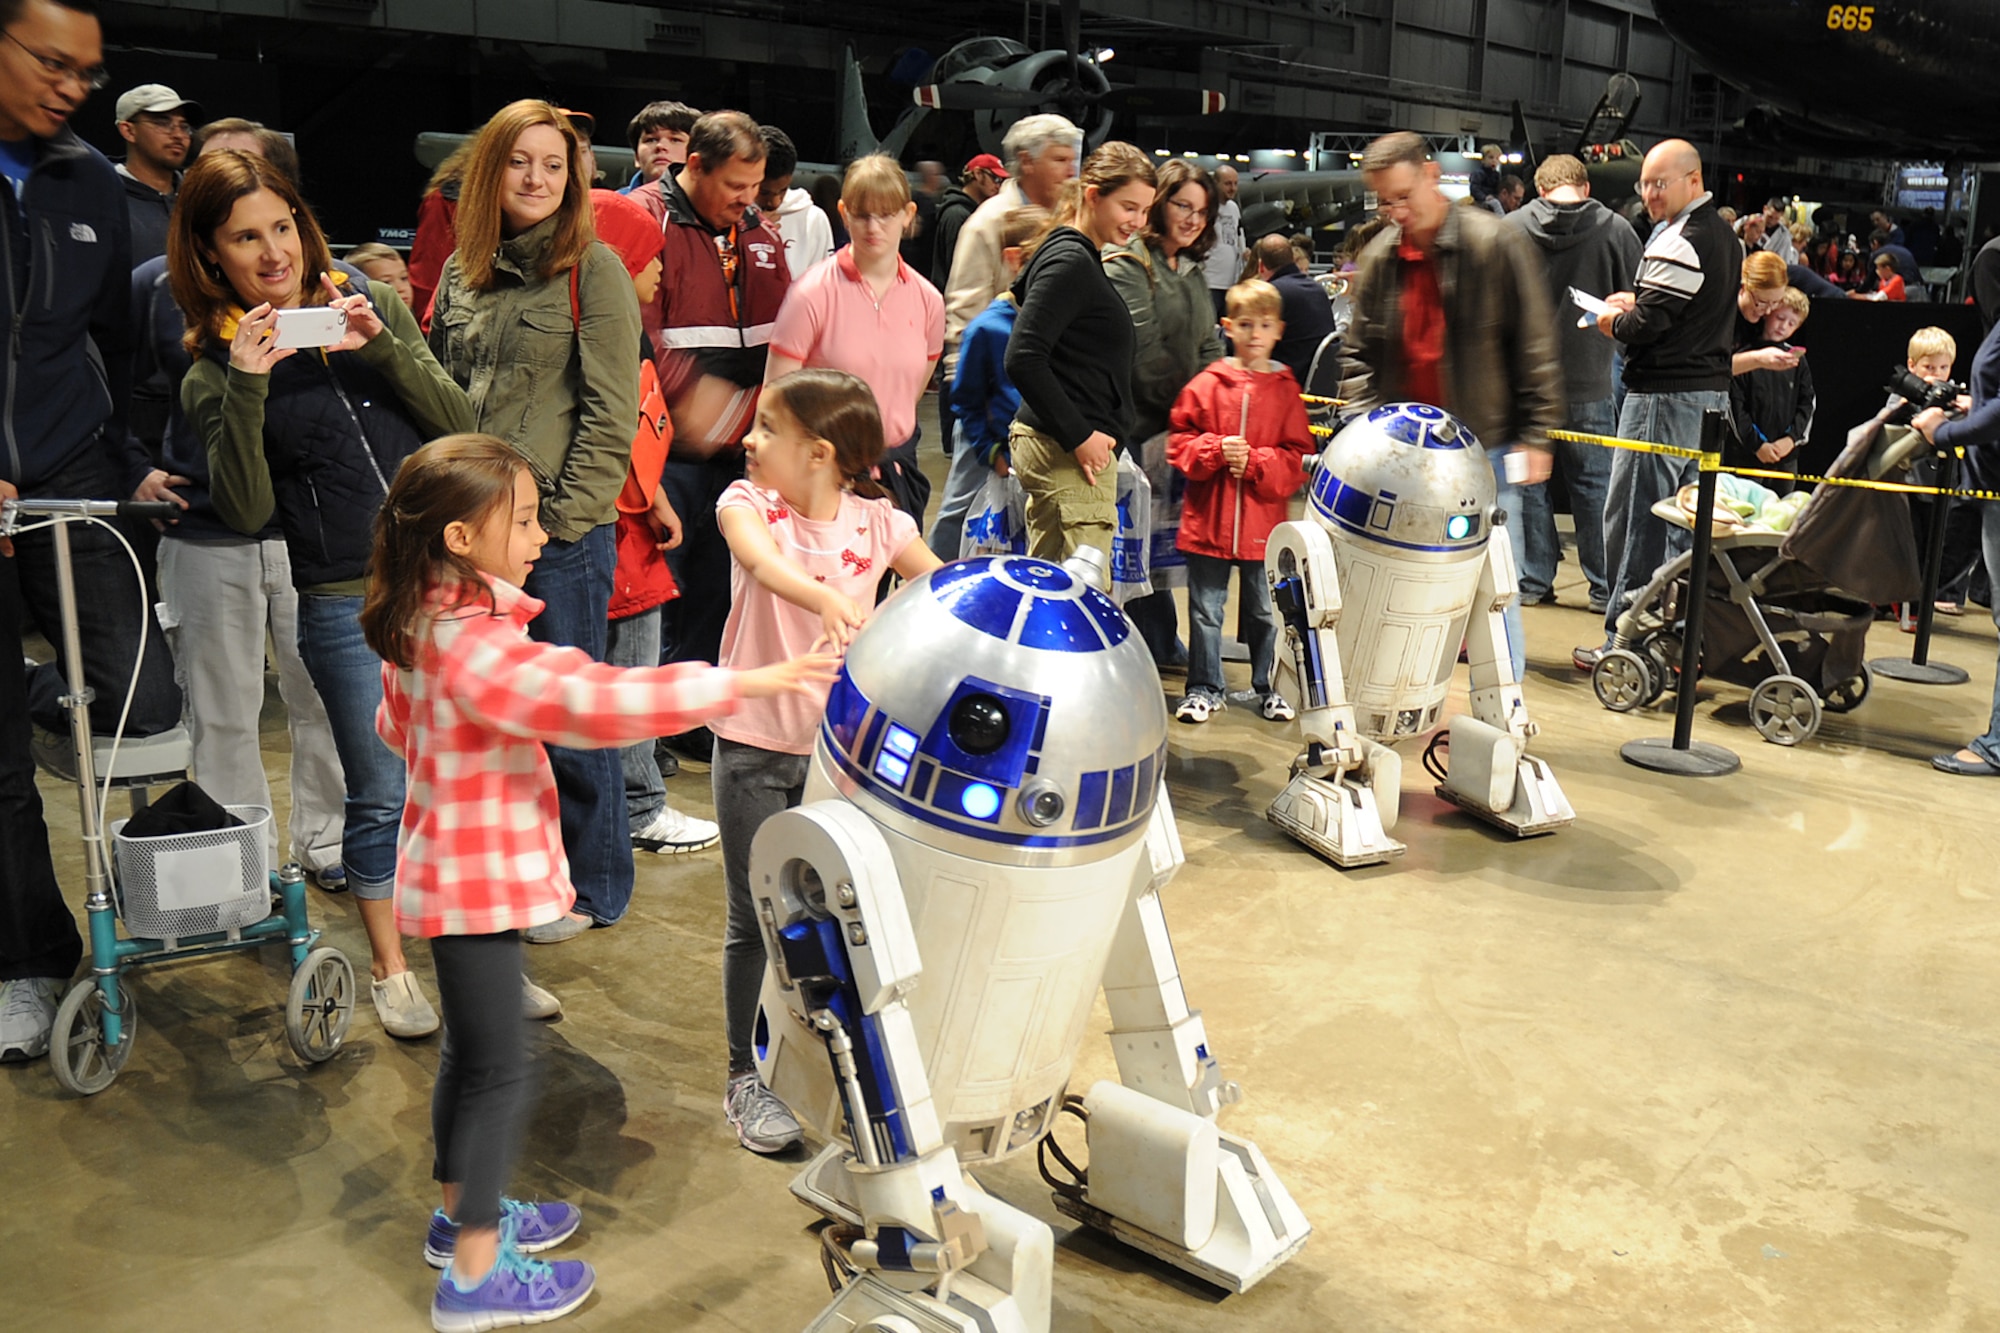 DAYTON, Ohio (05/2014) -- Special roaming characters including R2-D2 participated in Space Fest on May 16-17 at the National Museum of the U.S. Air Force. (U.S. Air Force photo)

